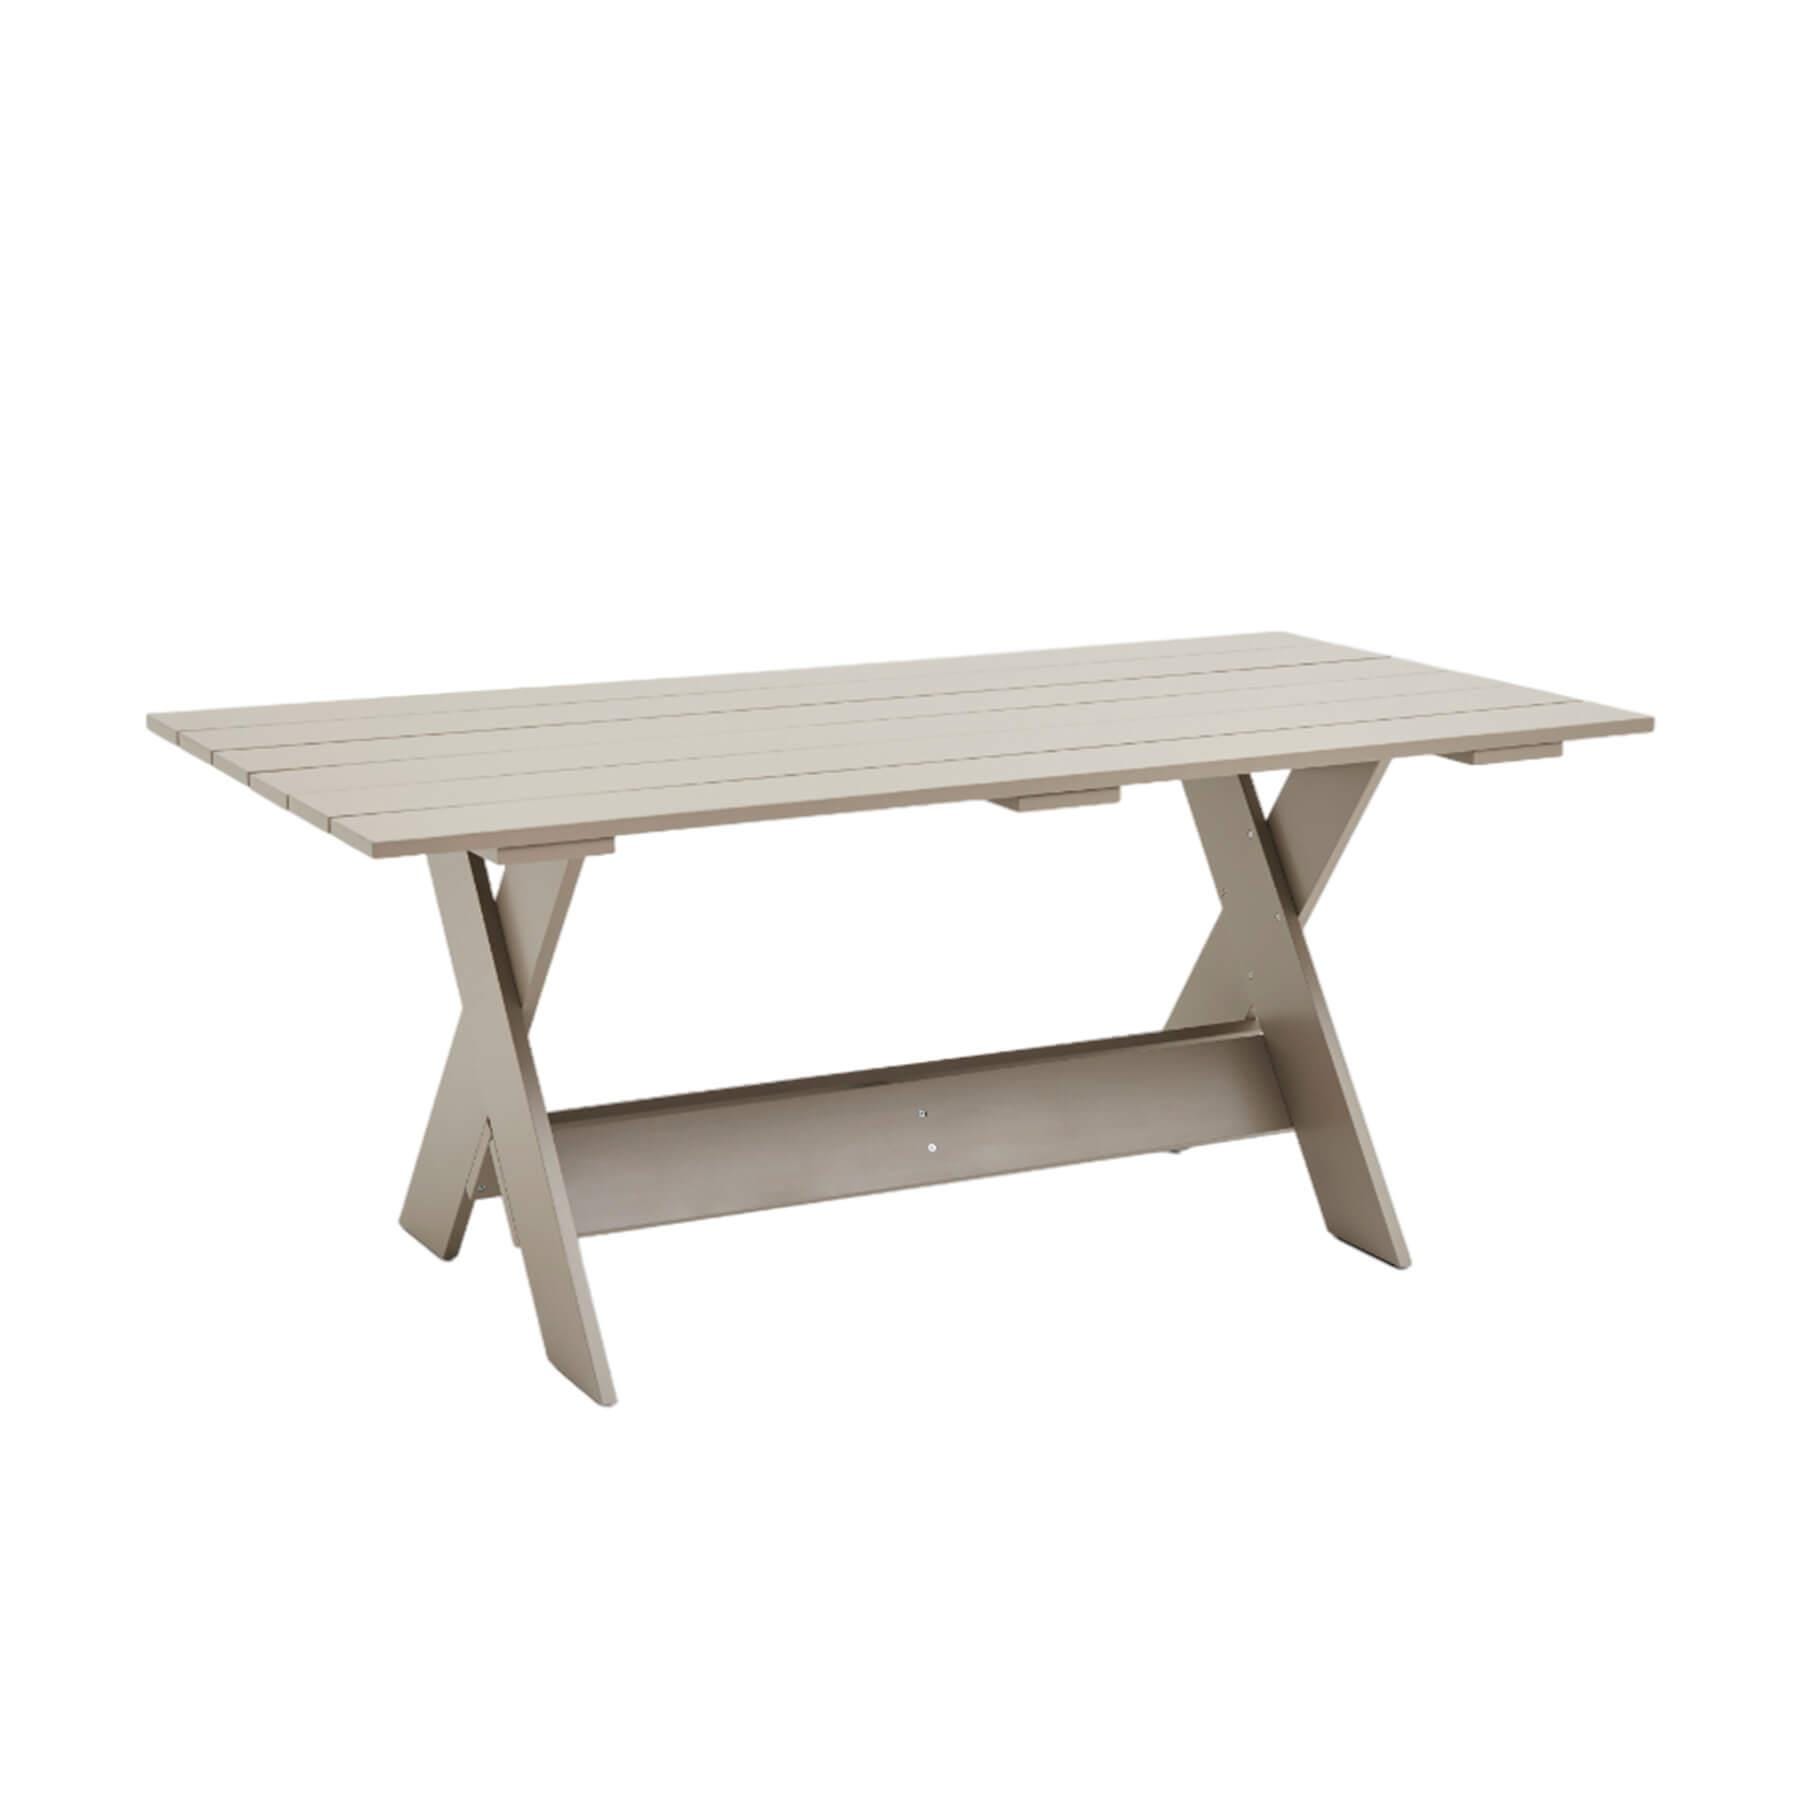 Hay Crate Dining Table 180 X 89 London Fog Grey Designer Furniture From Holloways Of Ludlow